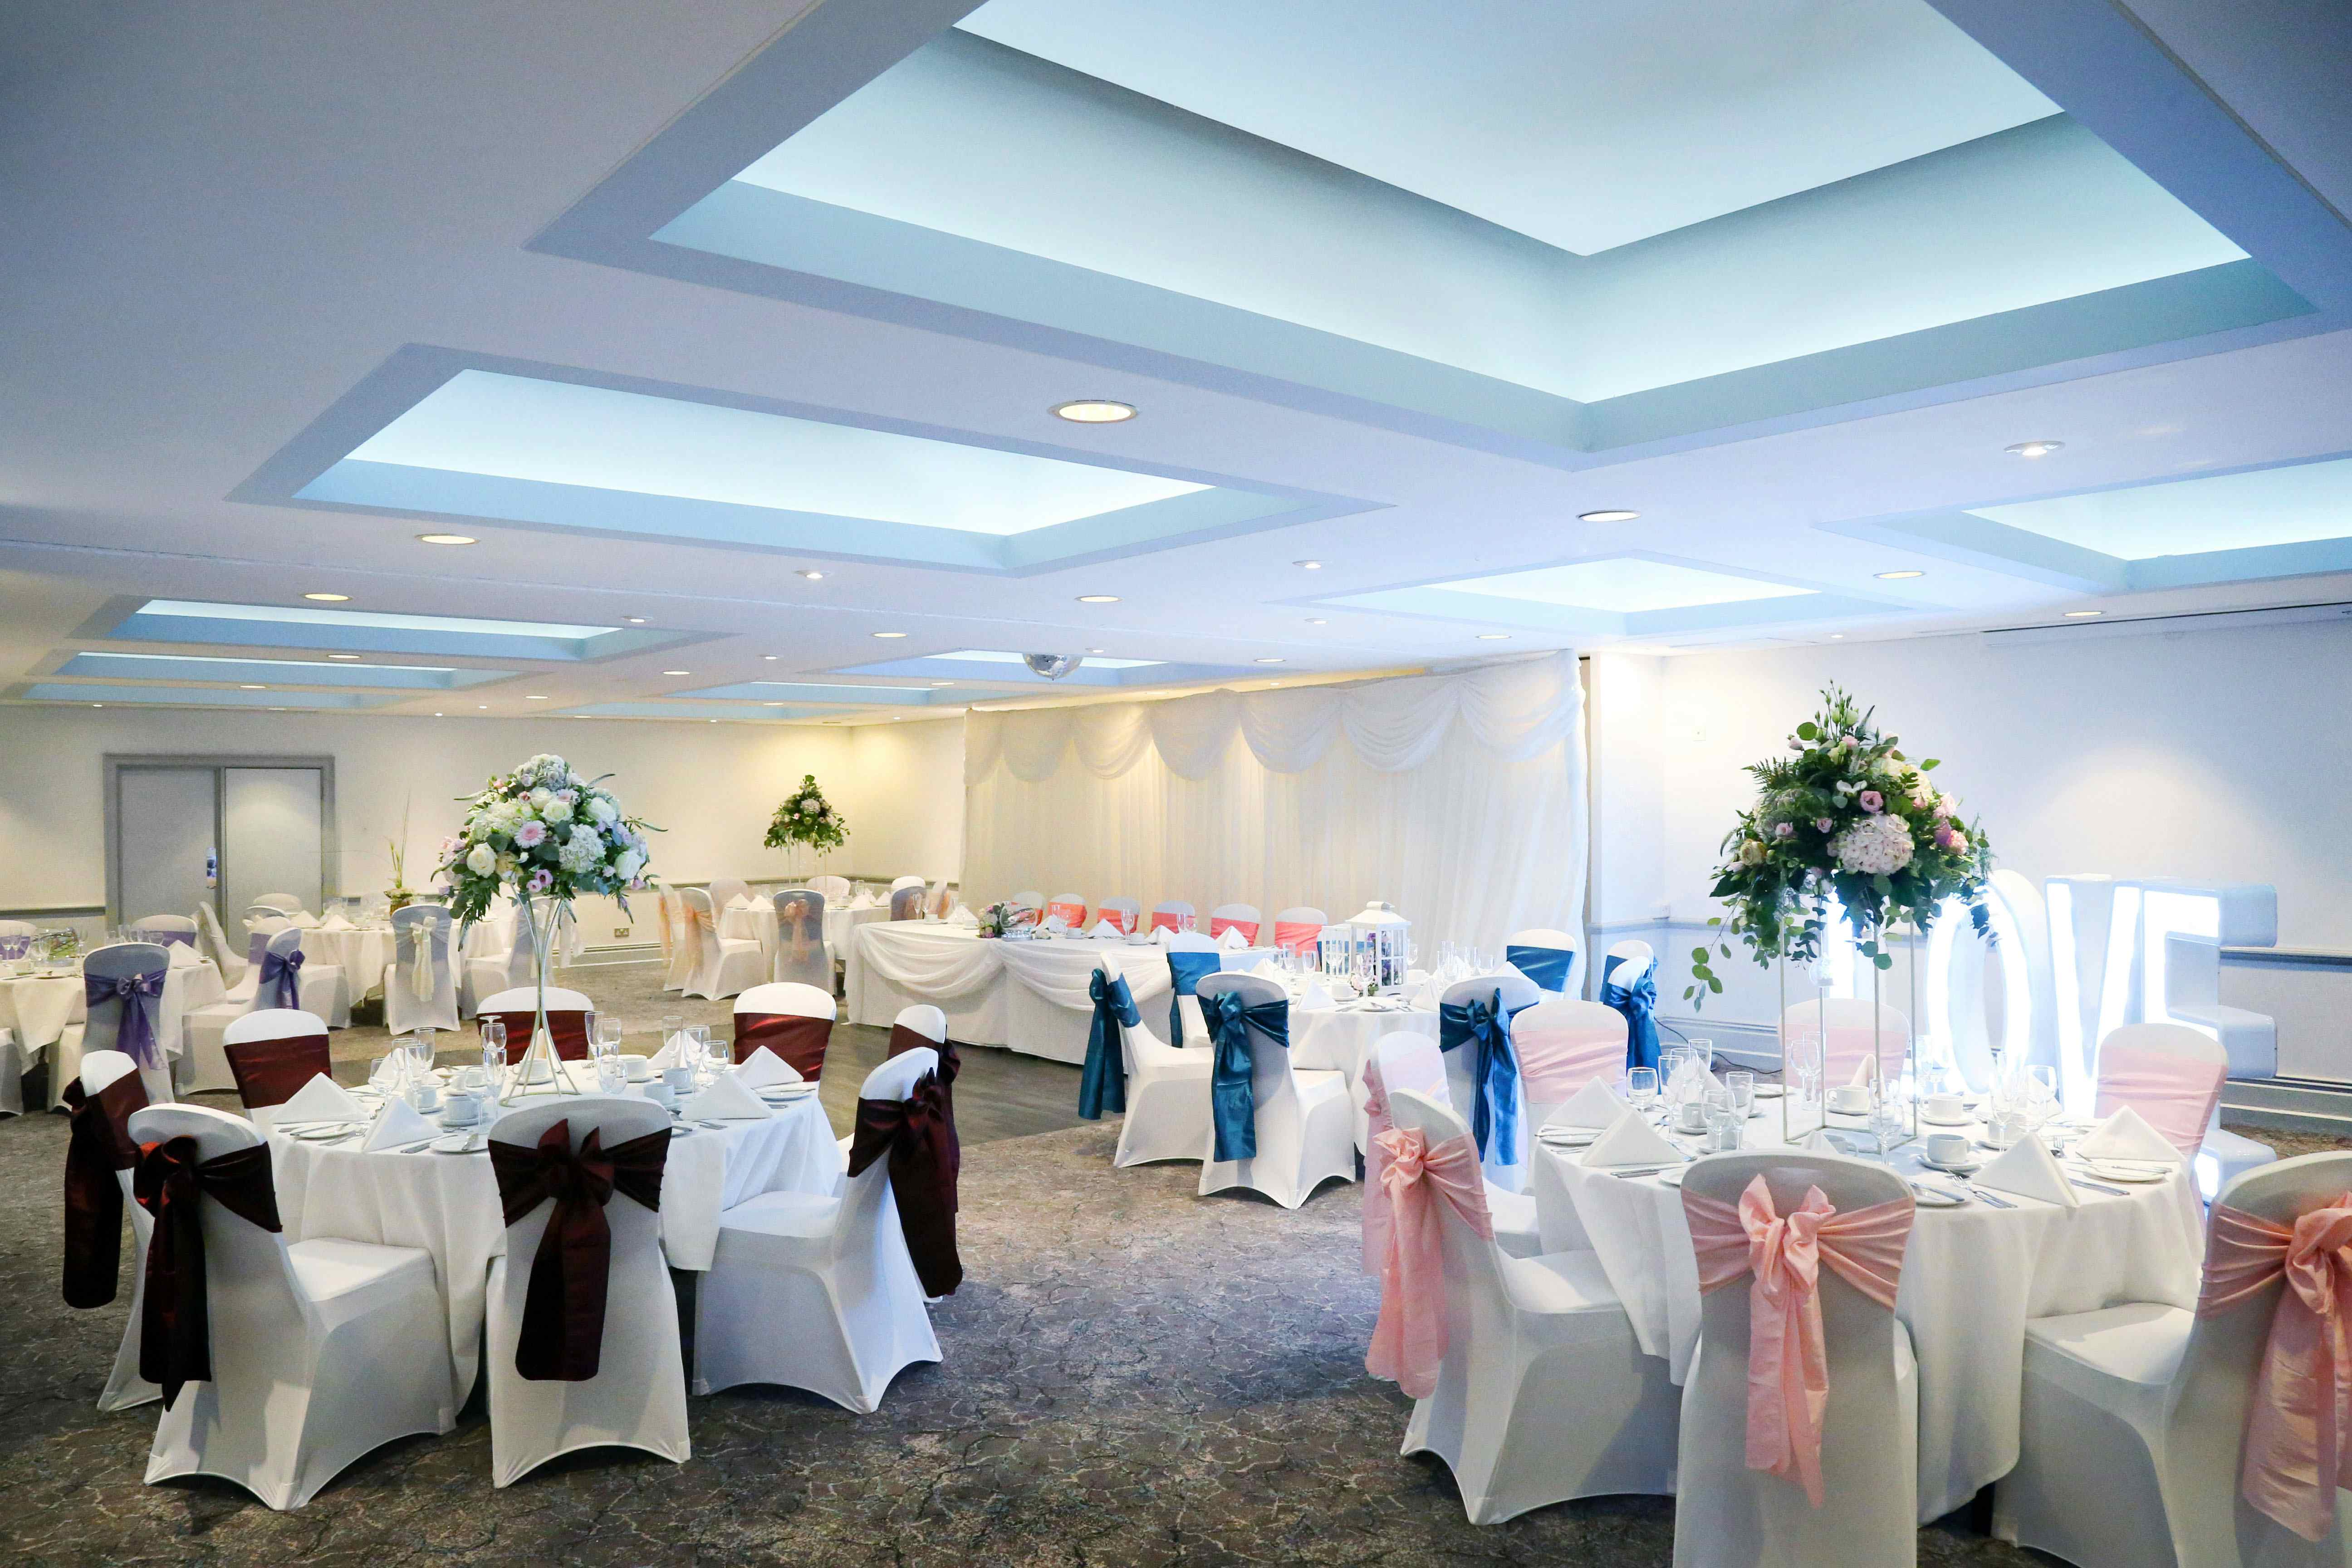 The Lant Suite, Nailcote Hall Hotel